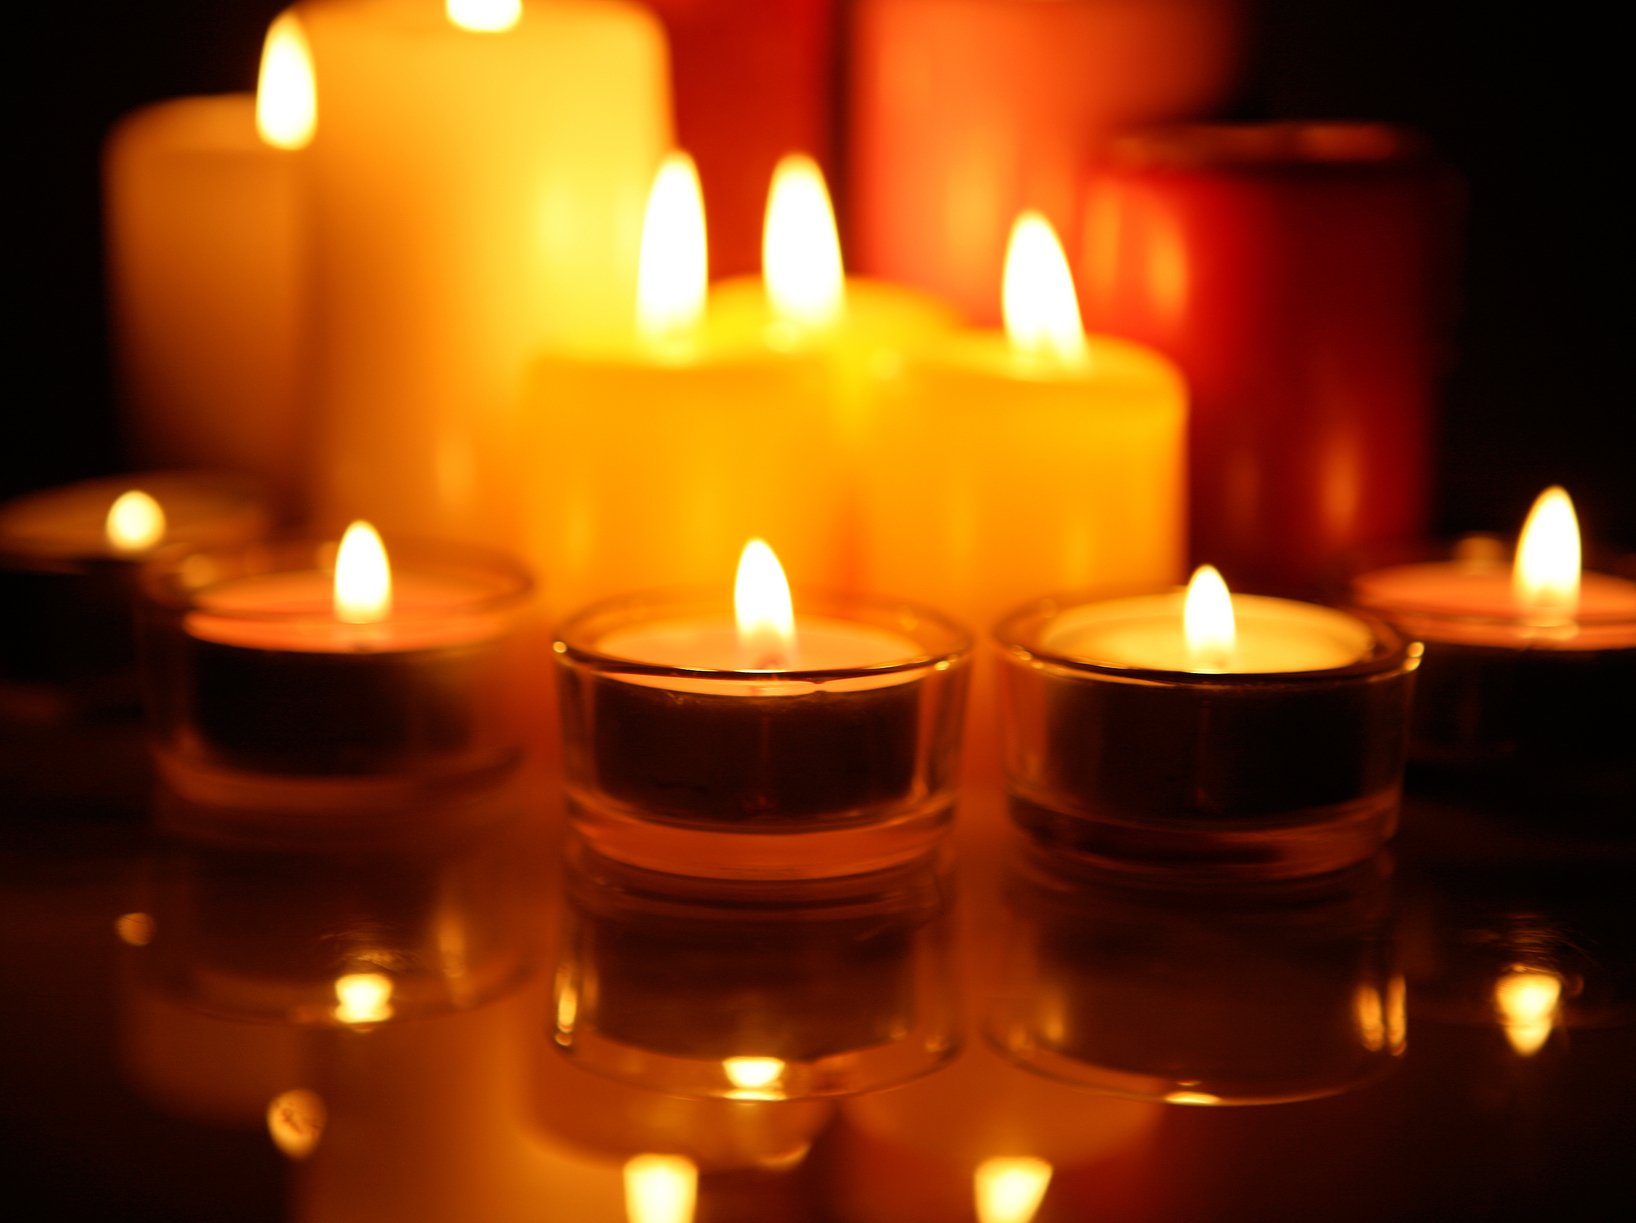 Why Lighting Candles Can Help Us Remember Our Dearly Departed And Help Us Through Grief